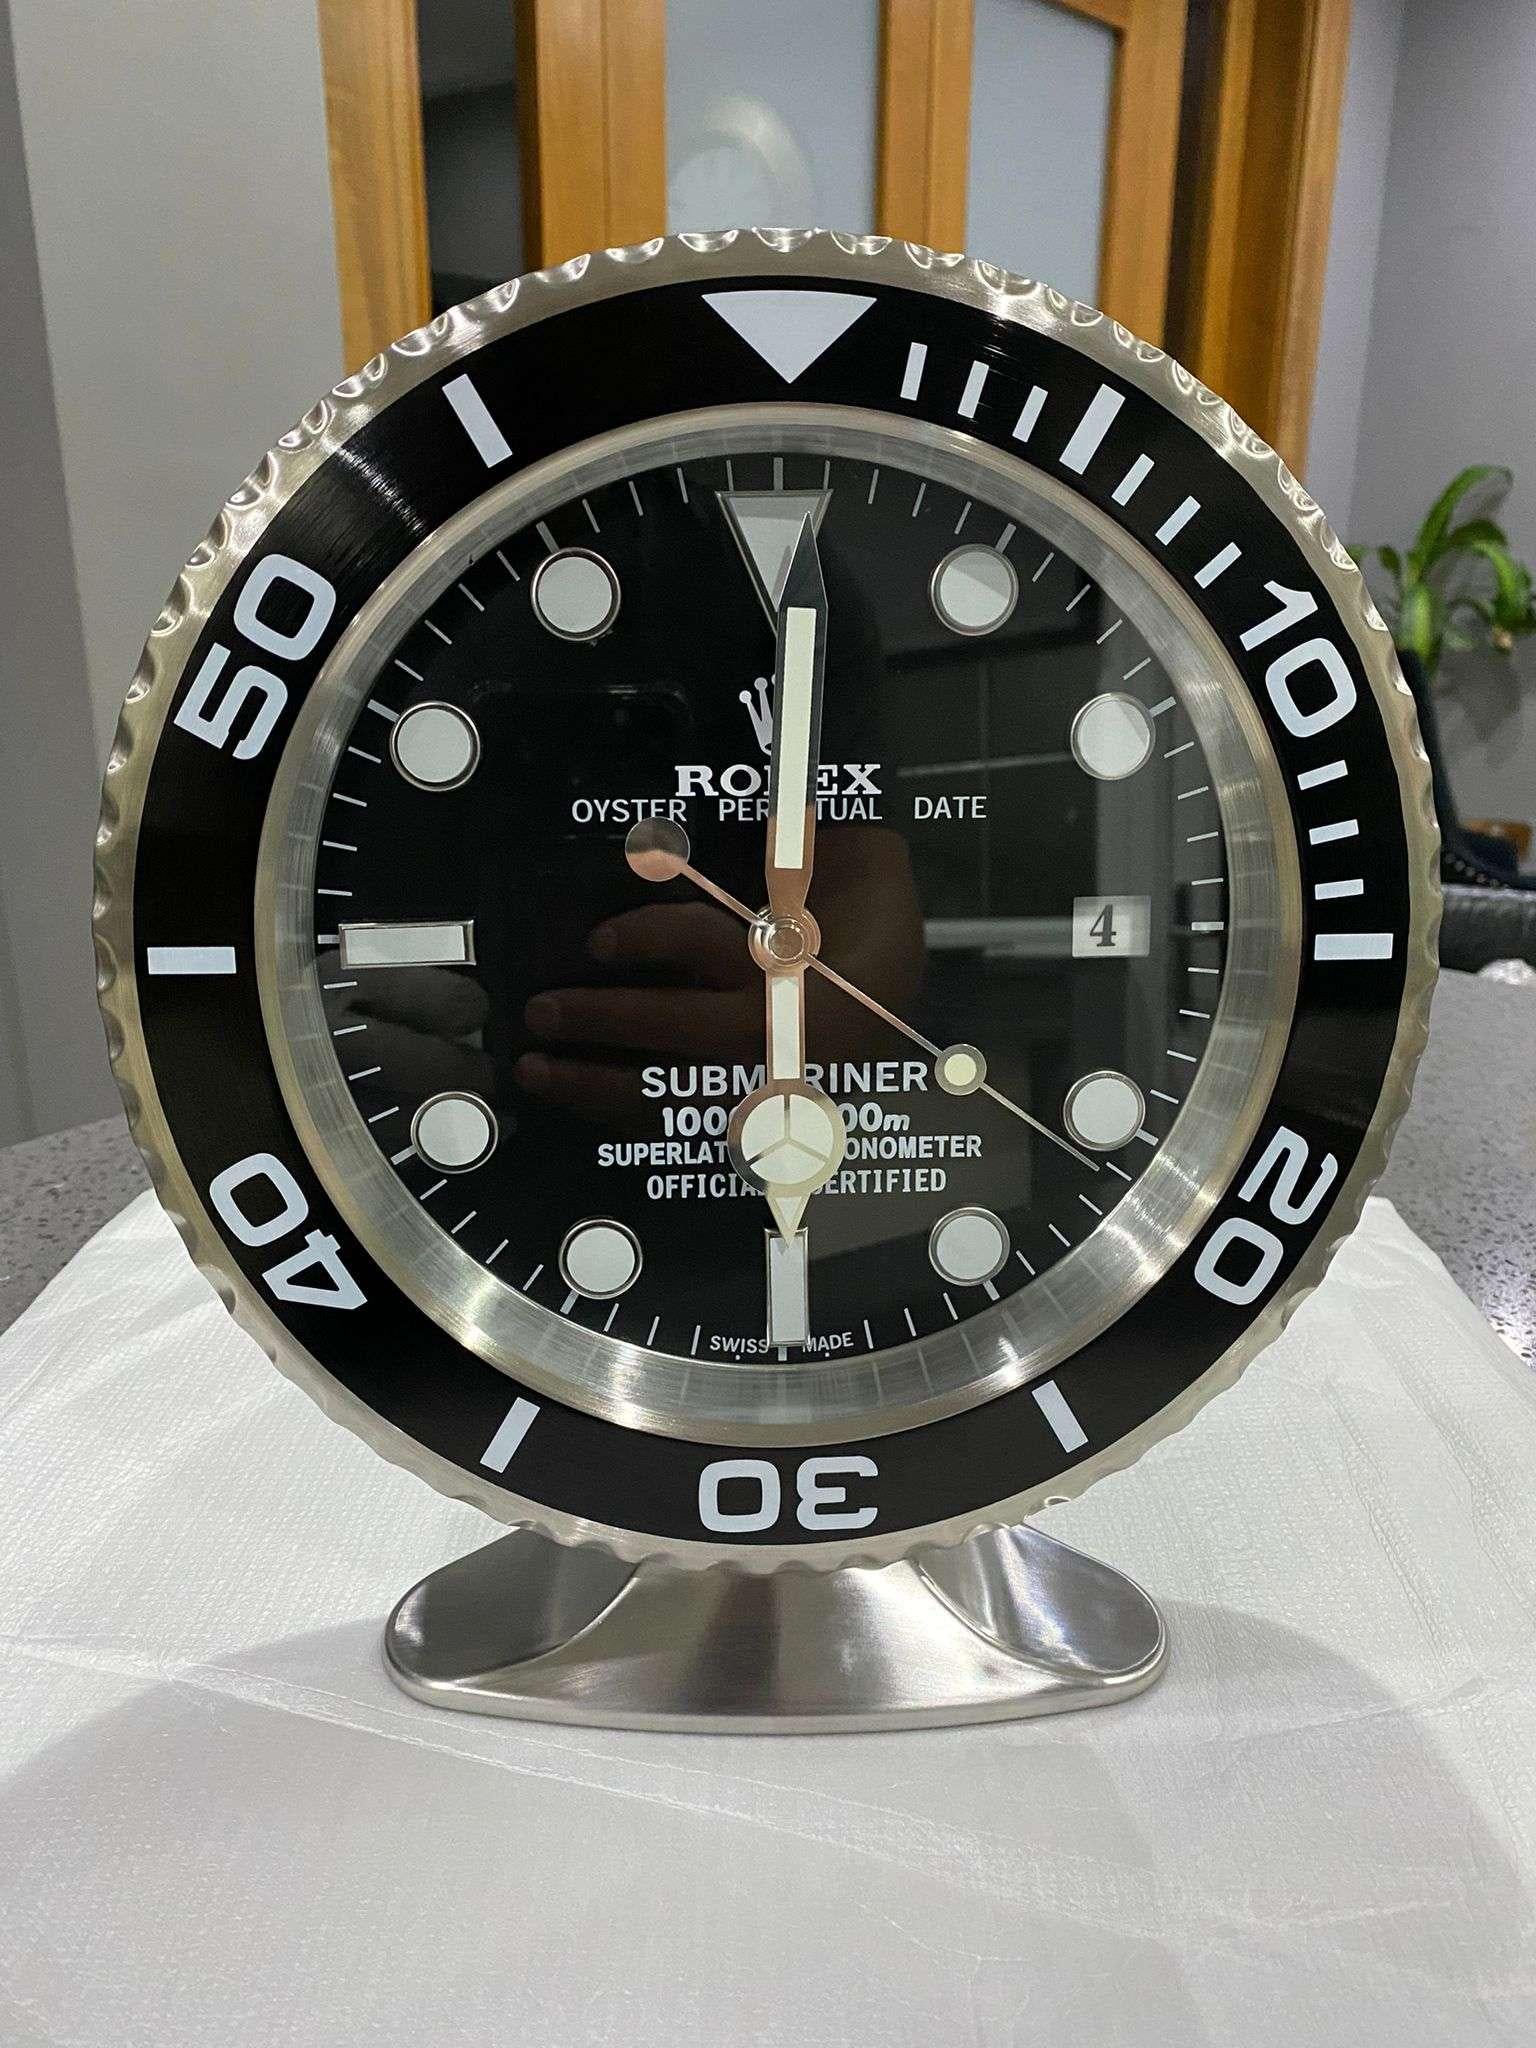 ROLEX Officially Certified Oyster Perpetual Black Submariner Desk Clock  In Good Condition For Sale In Nottingham, GB